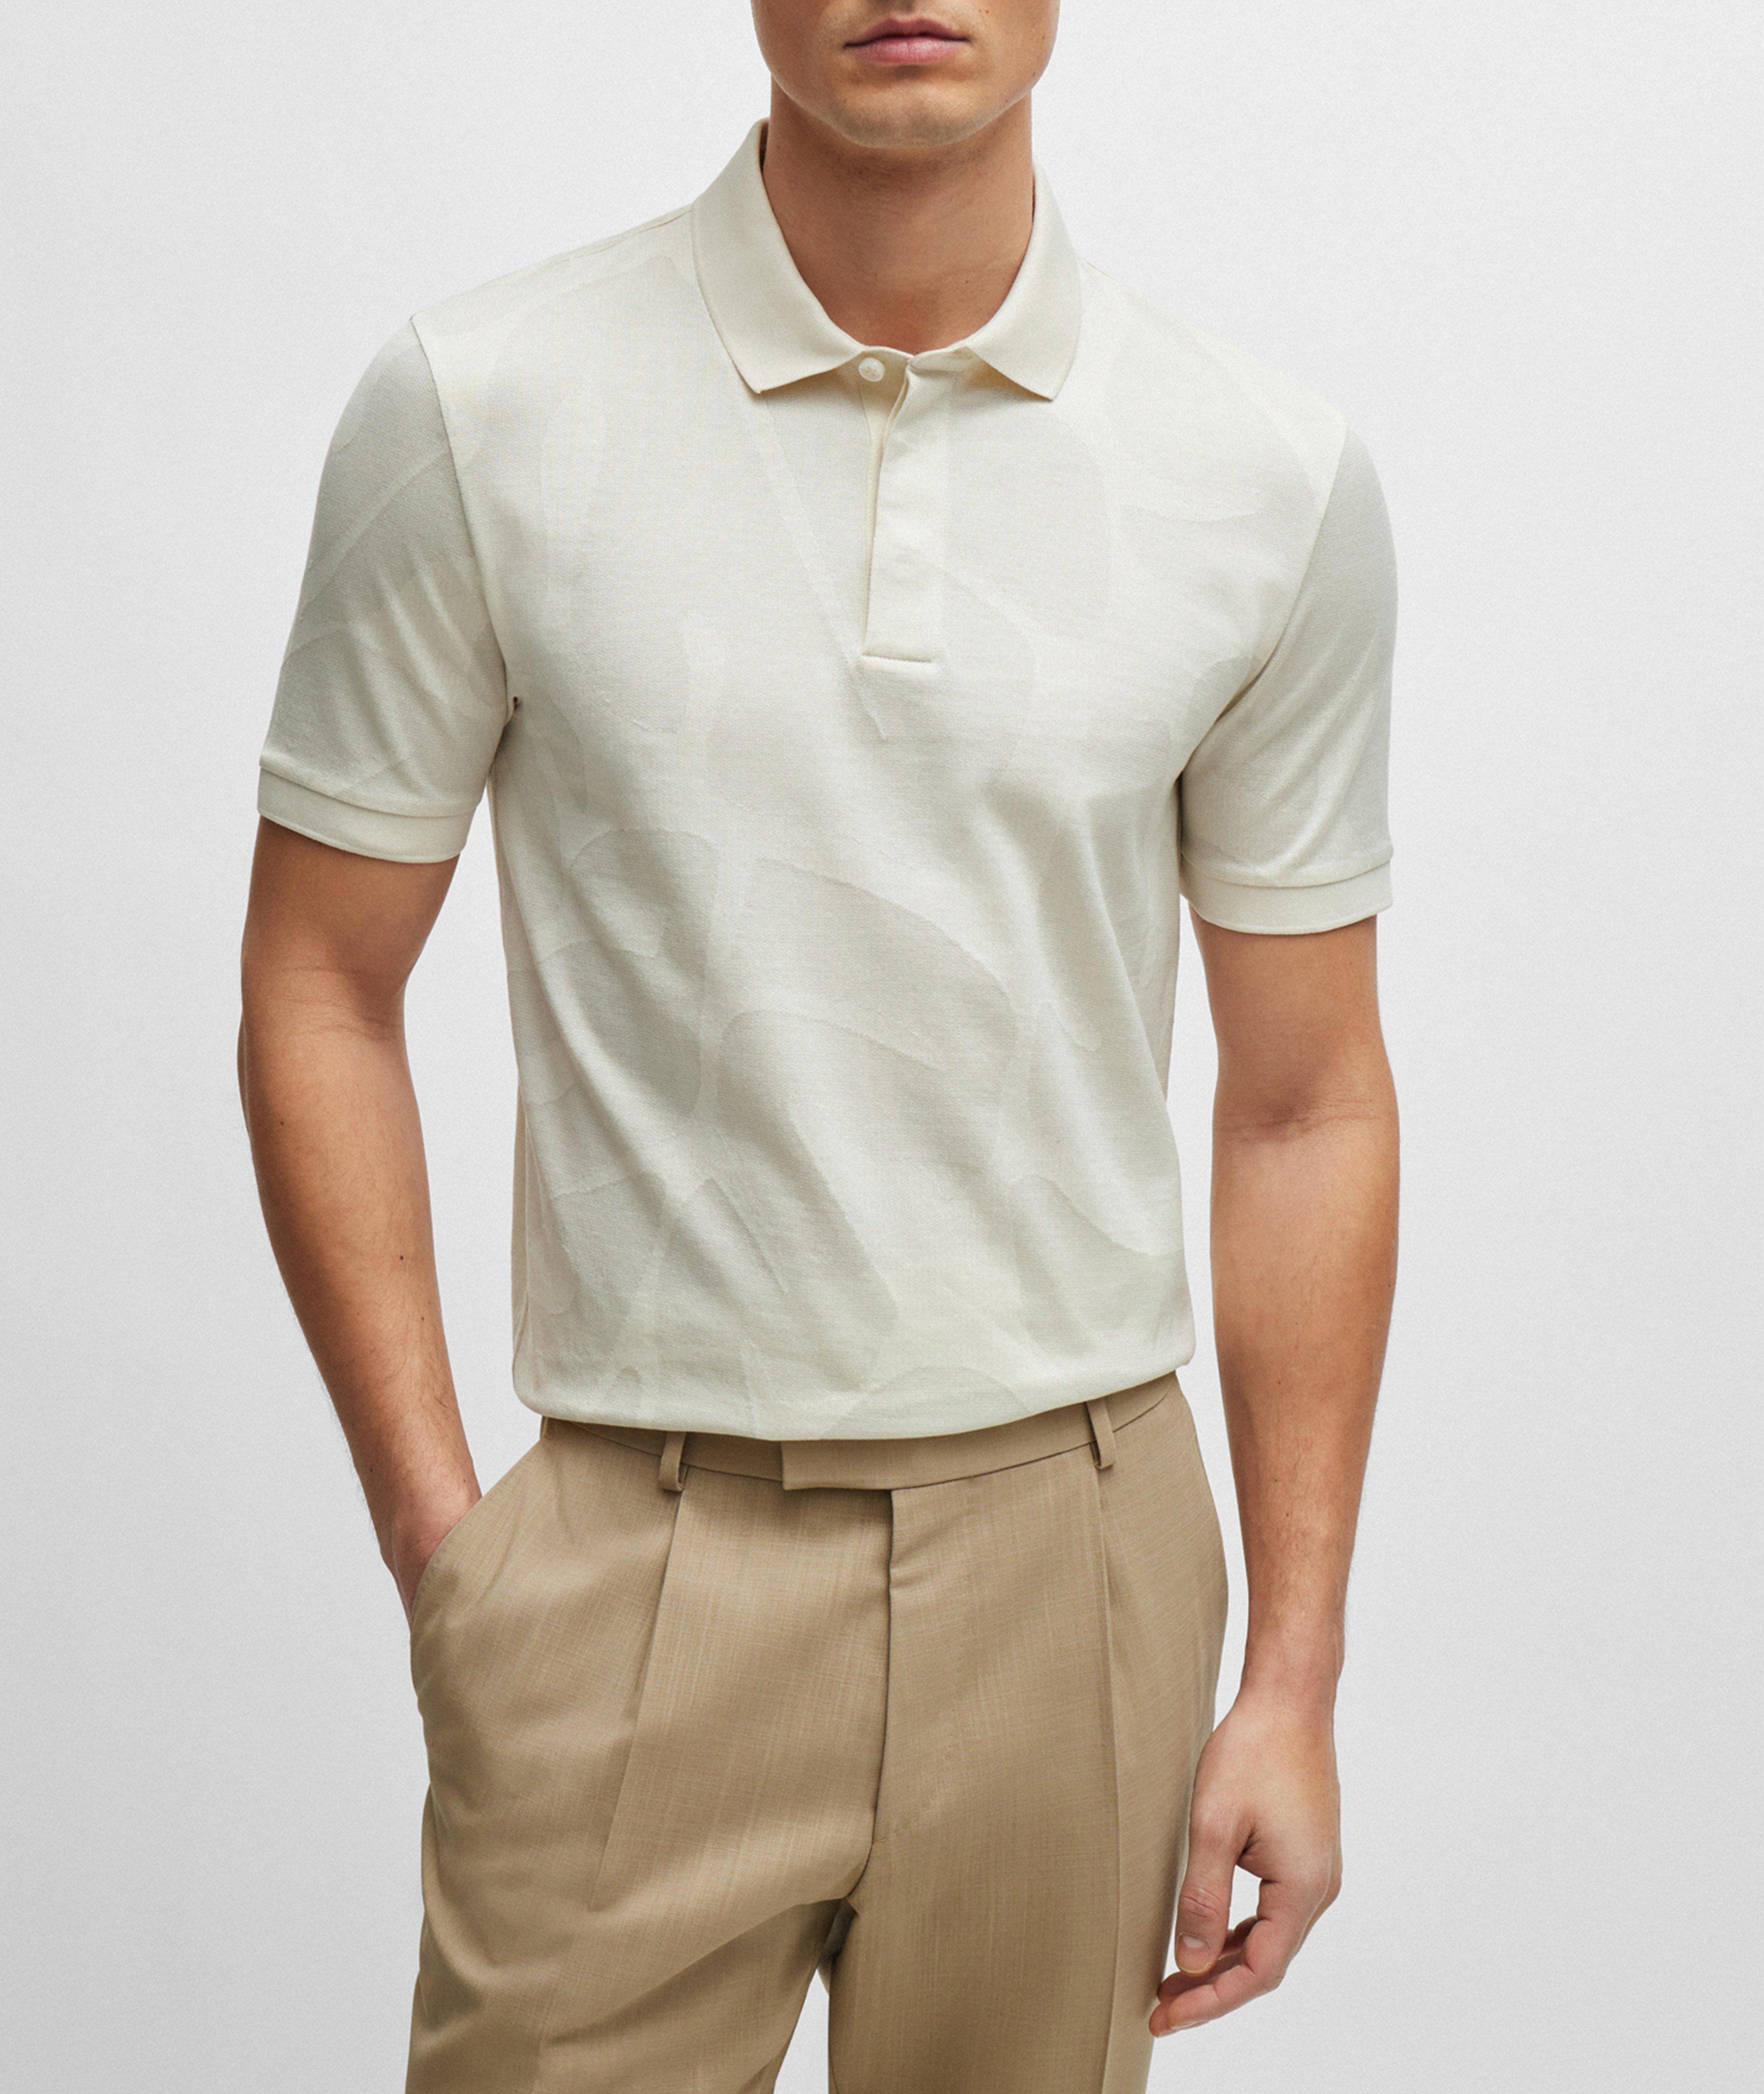 All-Over Monstera Leaf Cotton Polo image 1